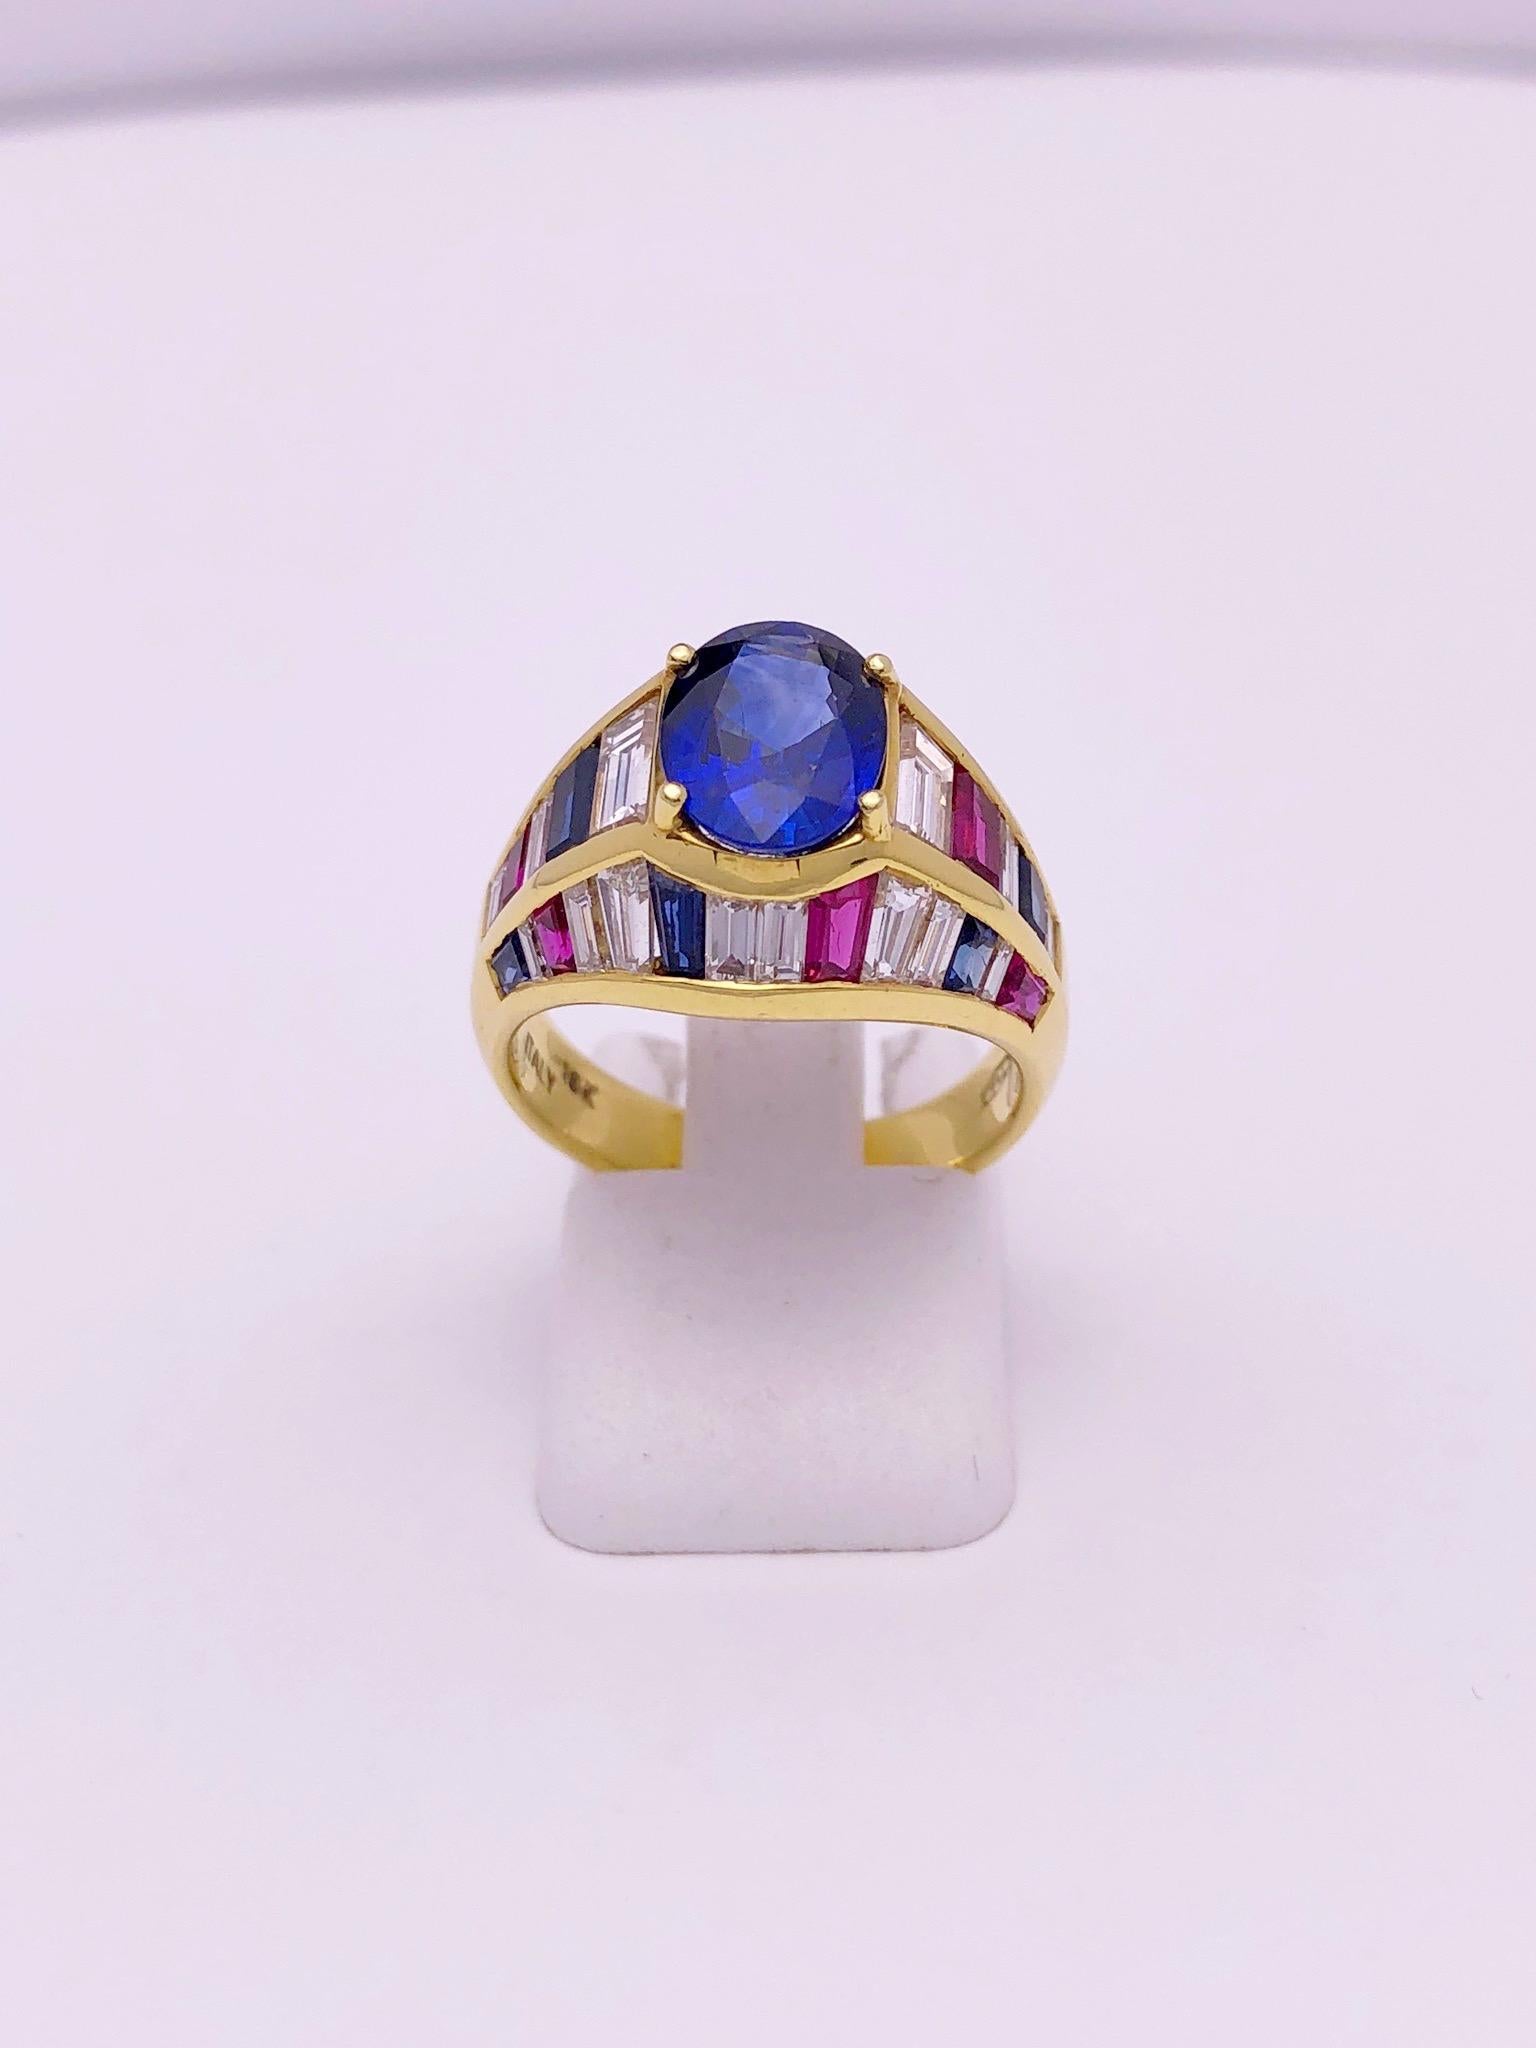 This 18 karat yellow gold ring was designed by Nino Verita of Italy. The setting alternates bagutte cut stones of diamonds, rubies, and blue sapphires set in a pyramid style setting. The center stone is an oval blue sapphire.
Center sapphire 2.30